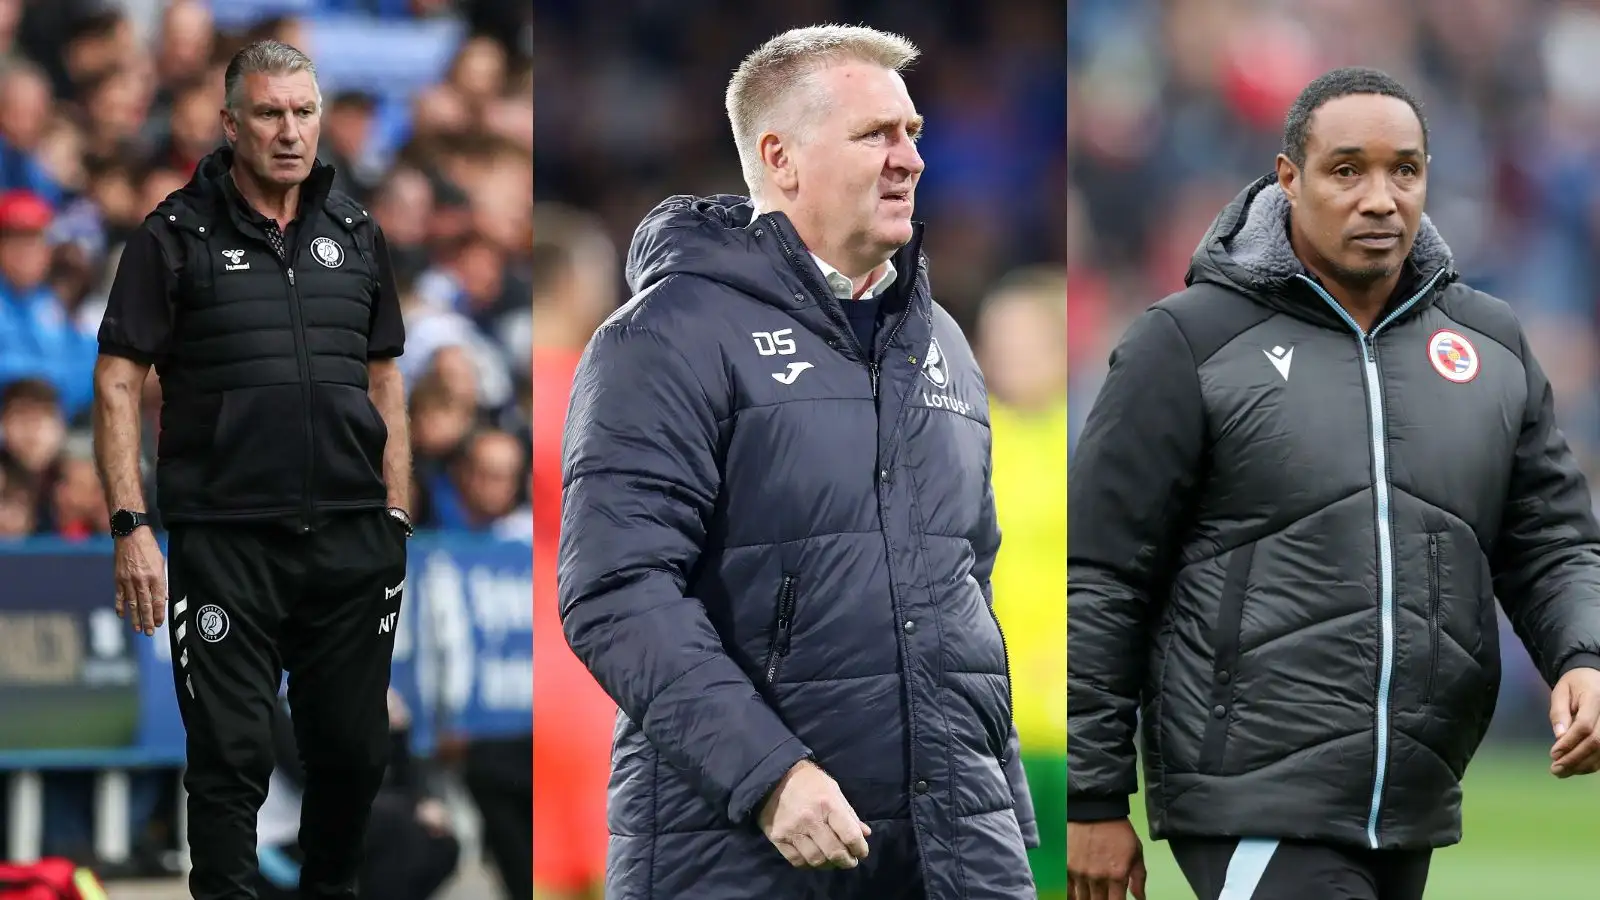 Dean Smith or Nigel Pearson sacked next? Five Championship managers who could be in trouble